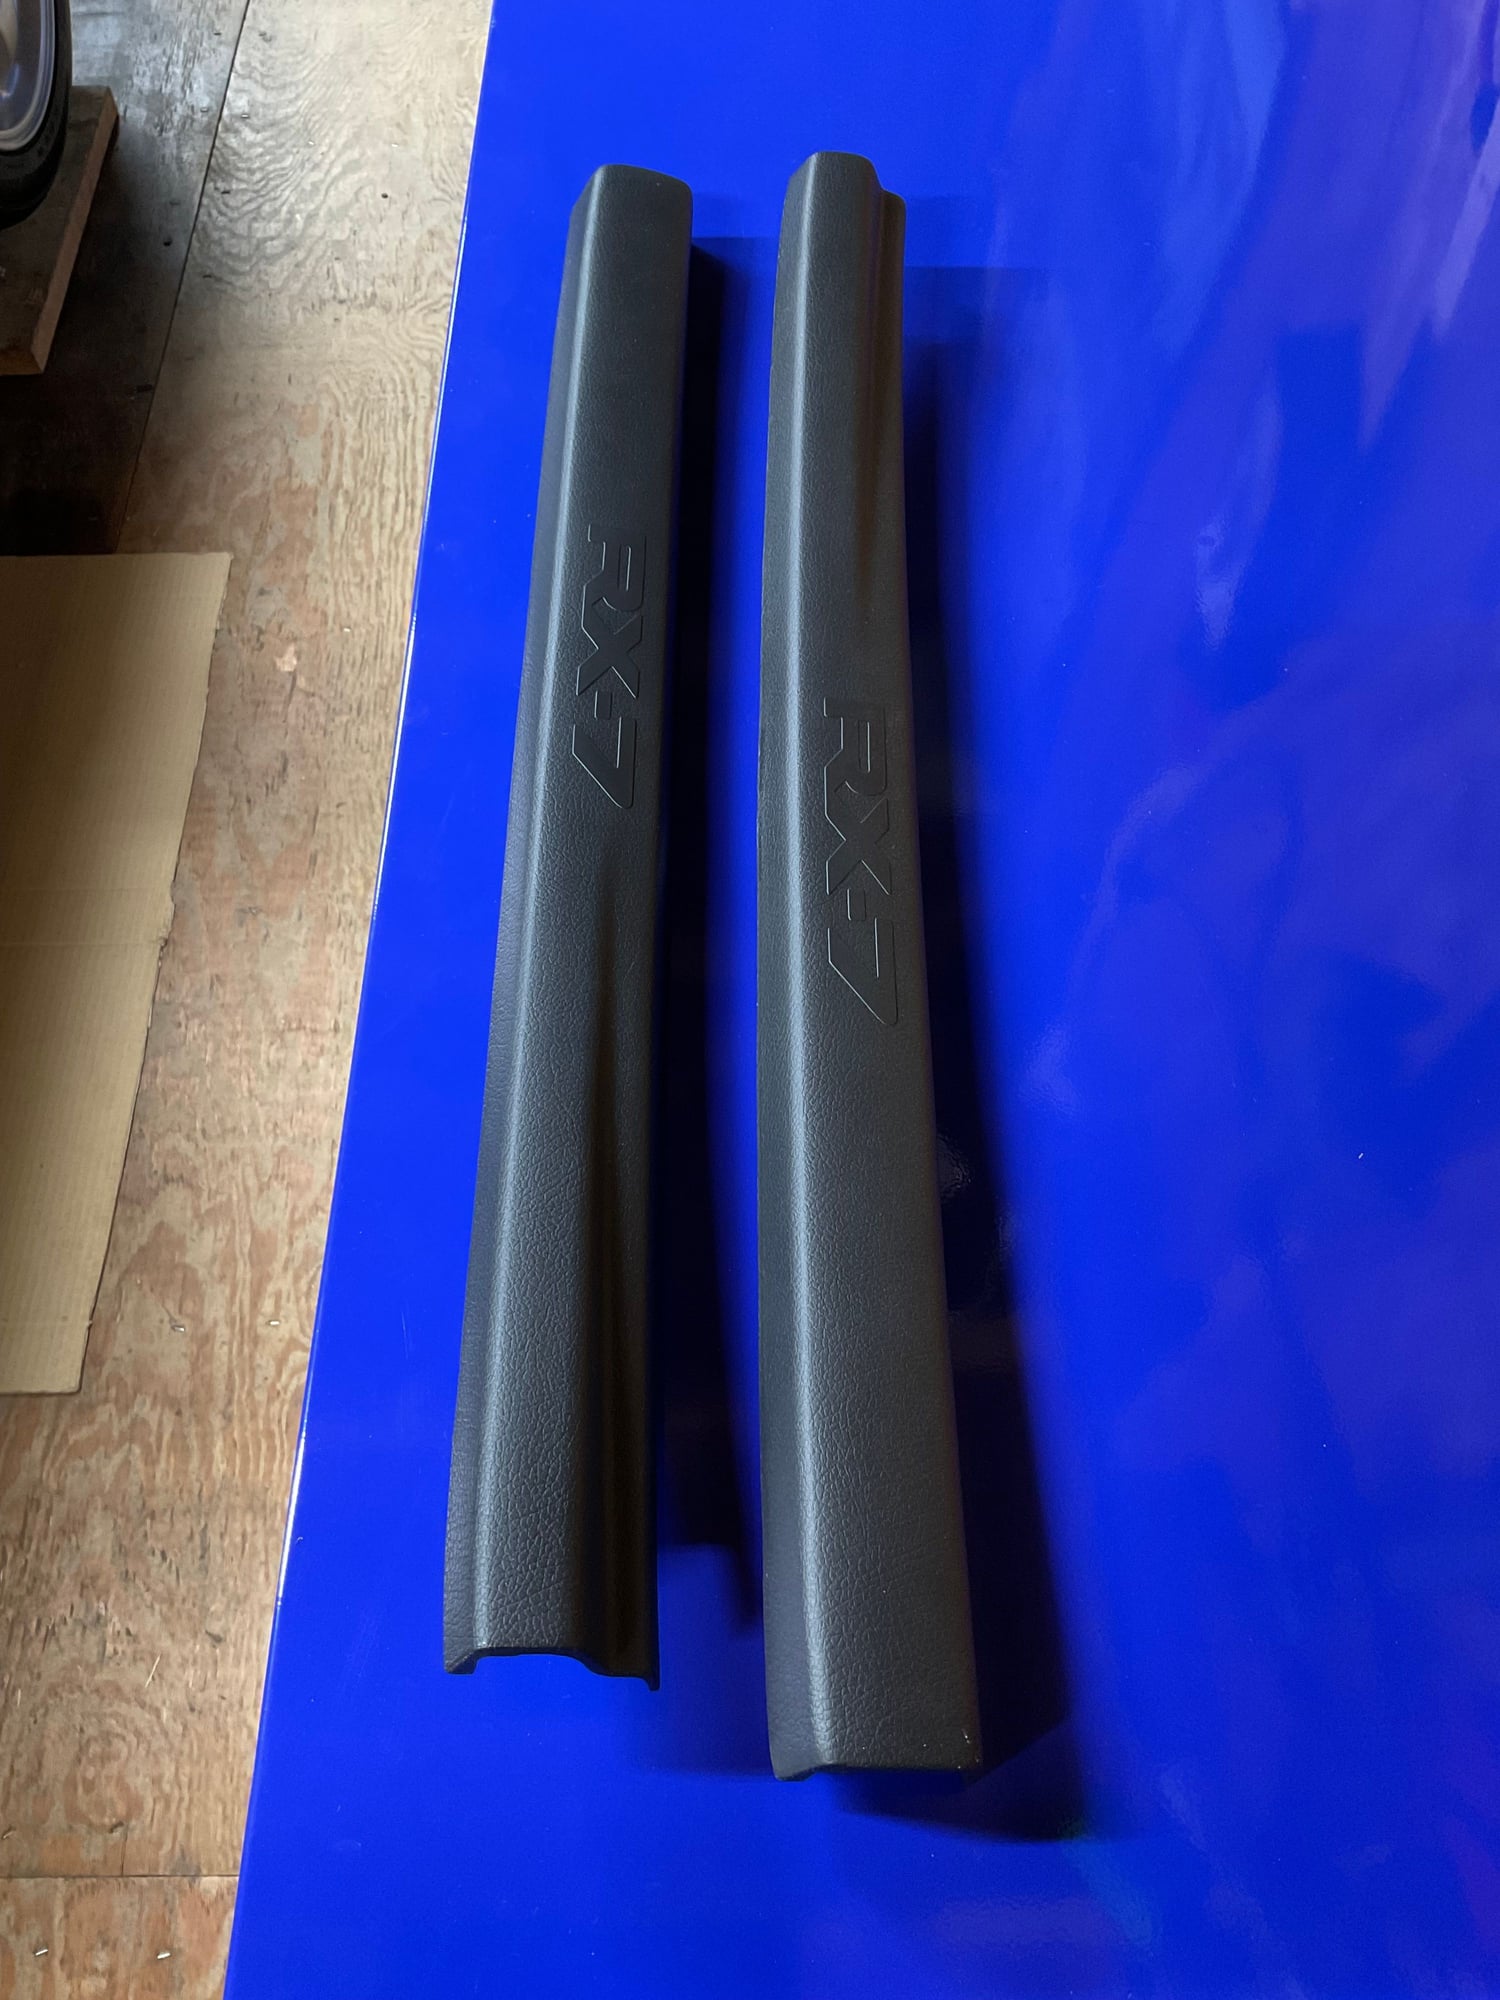 Interior/Upholstery - Rx7 FD Door Sills L+R (NEW) - New - Prince Frederick, MD 20678, United States